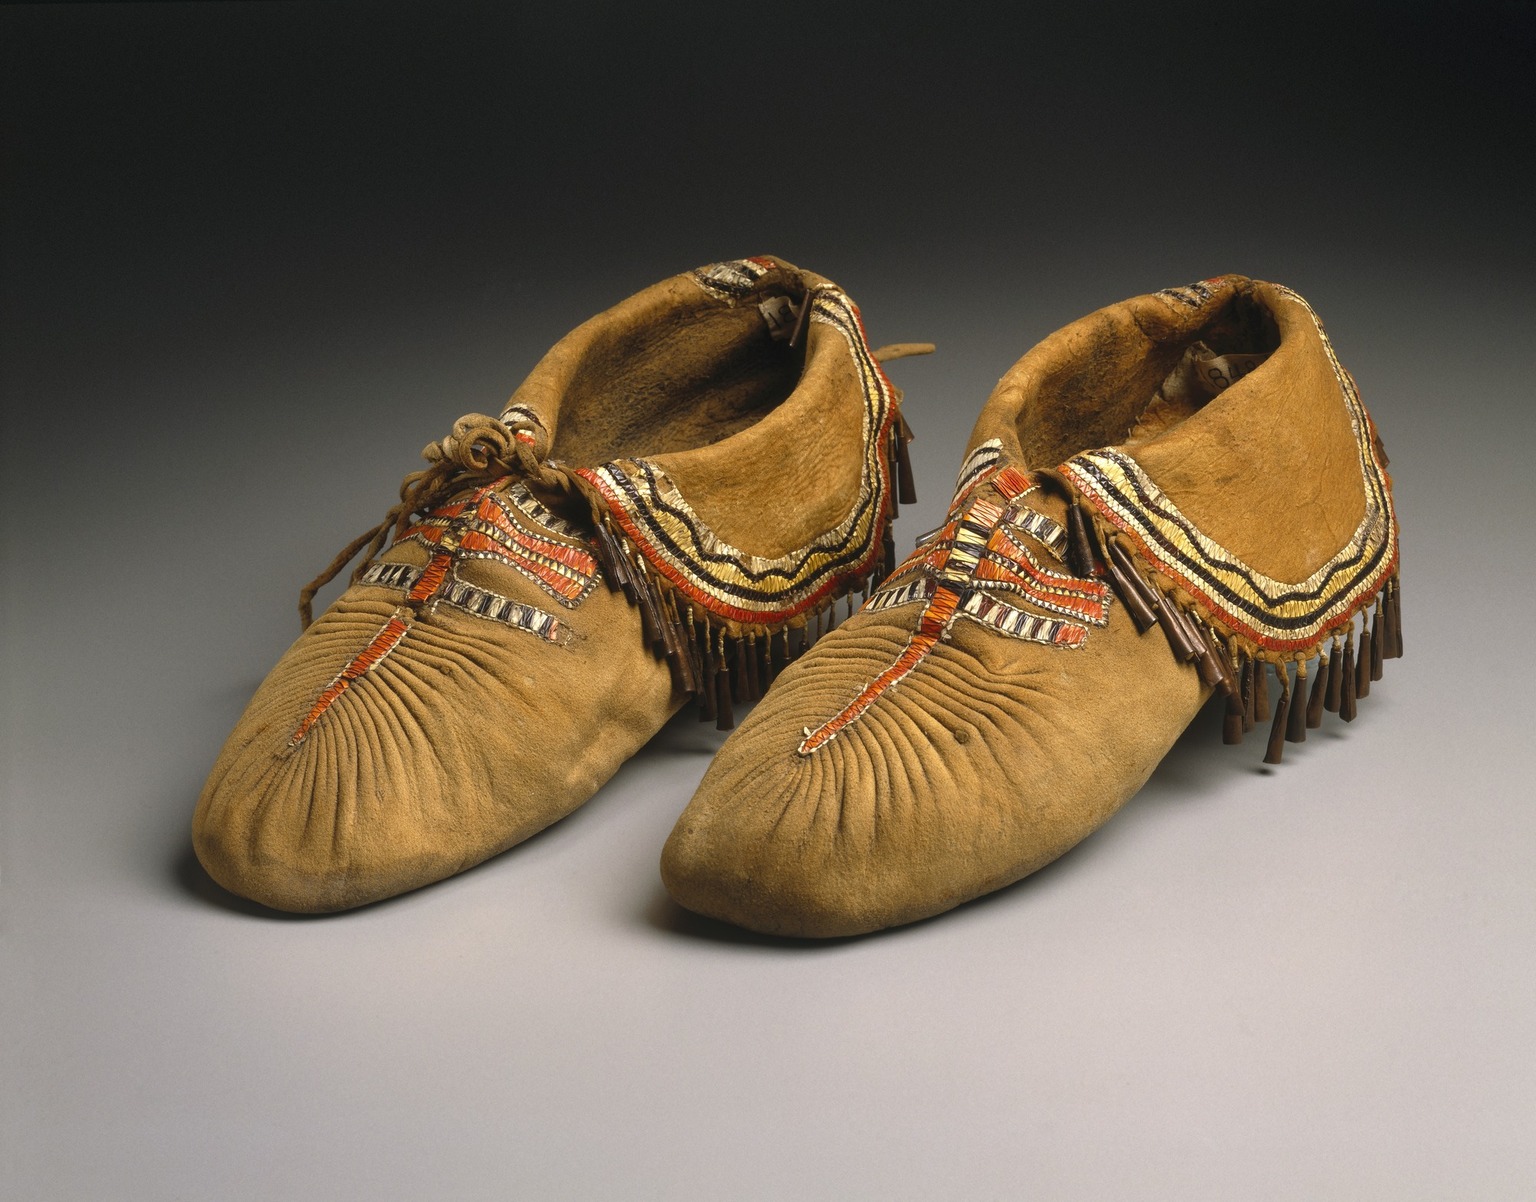 Men's Bison Eastern Woodlands Traditional Native American Pucker Toe Moccasin along with FREE LEATHER POUCH Schoenen damesschoenen Instappers Mocassins 